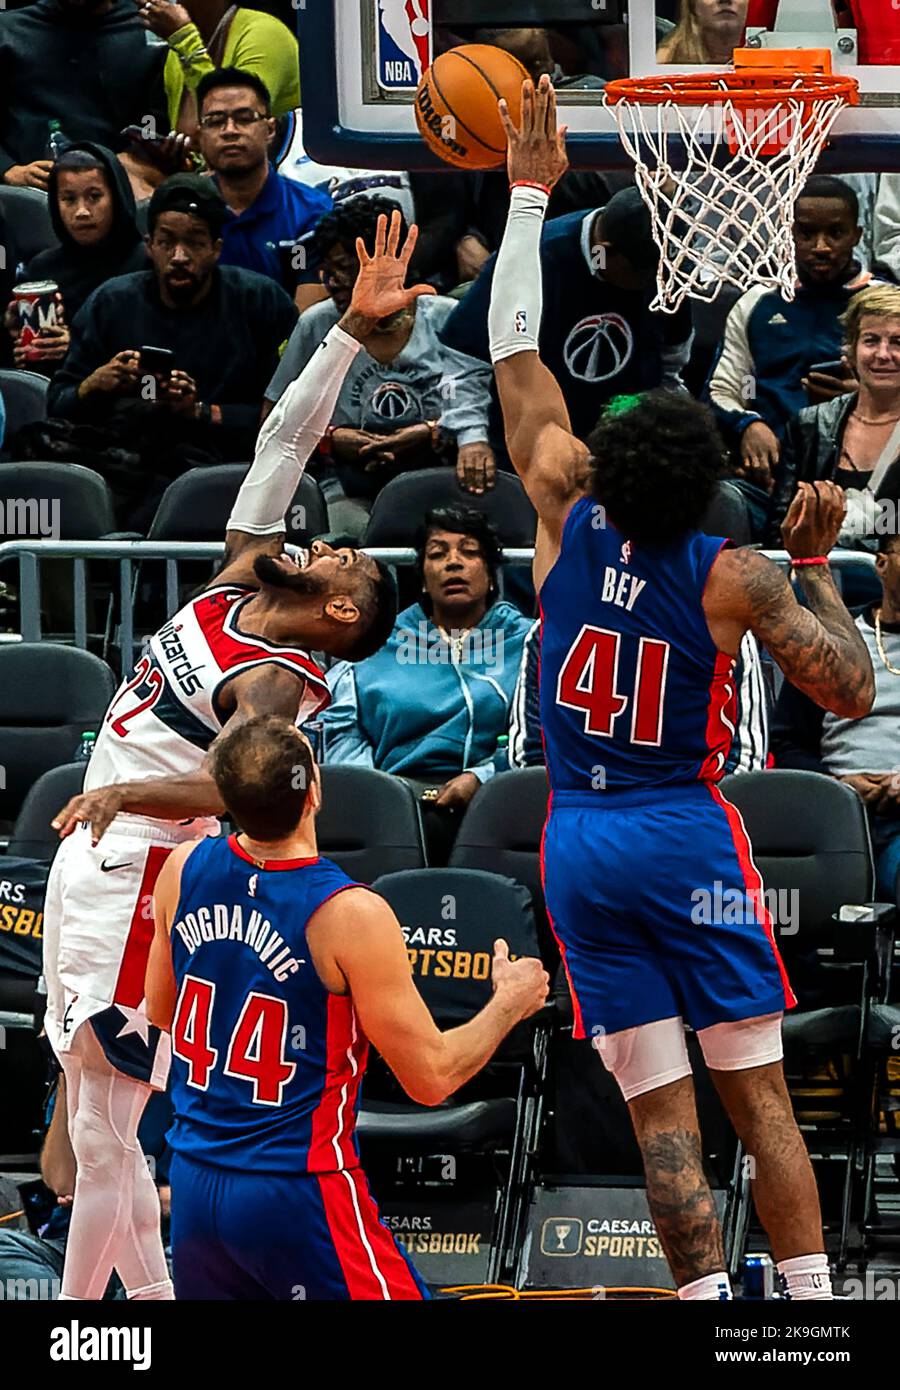 A little action from Washington Wizards basketball game against the Detroit Pistons Stock Photo